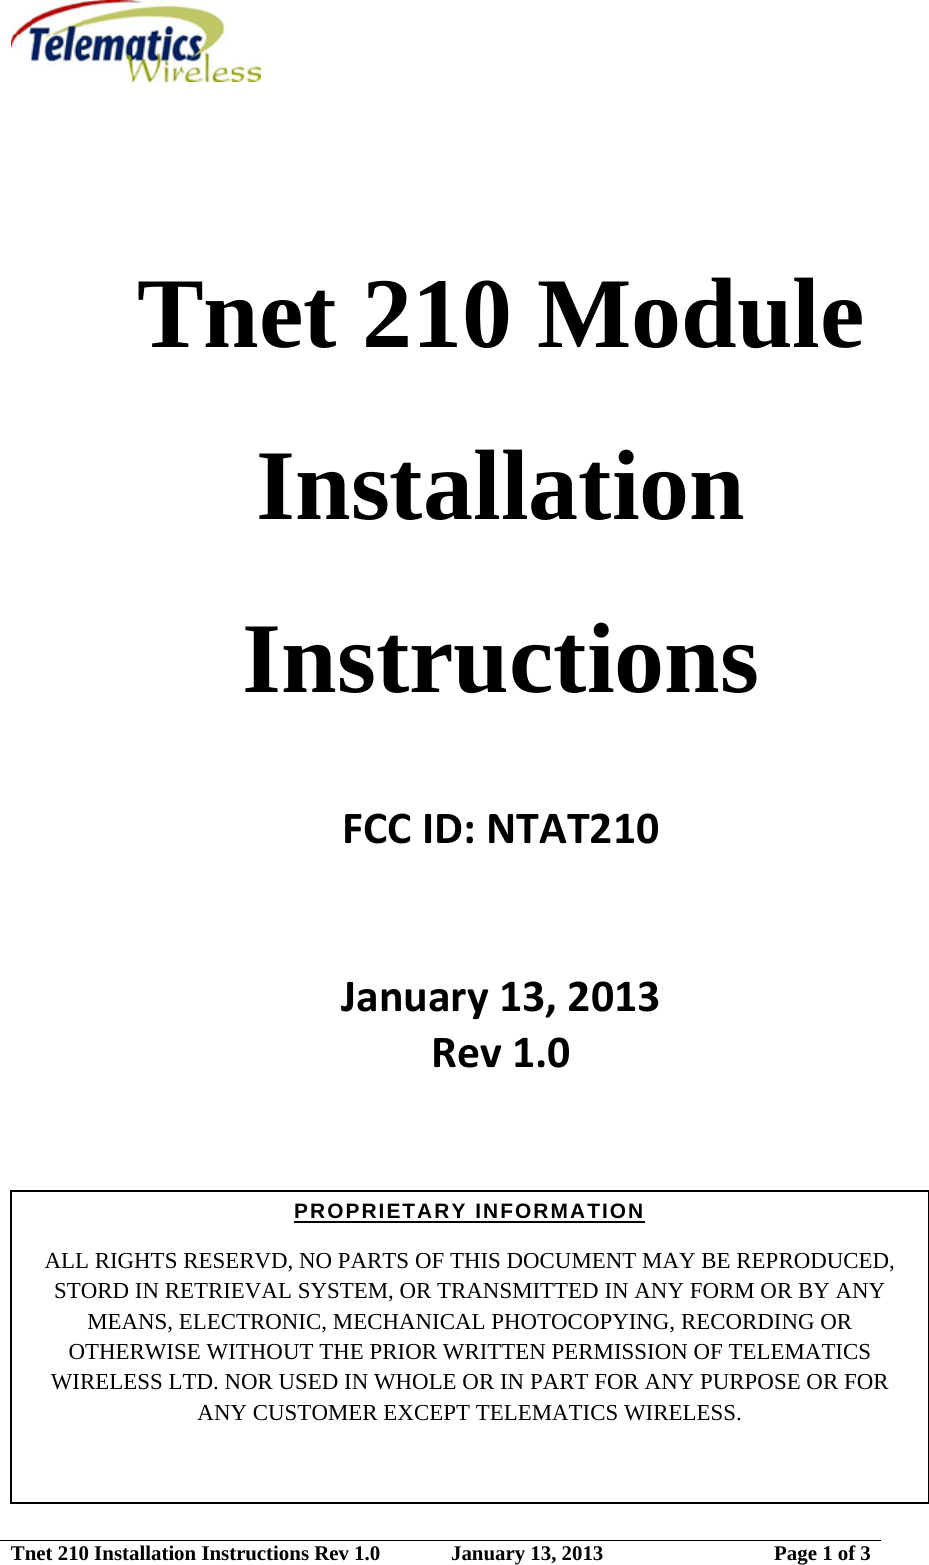  Tnet 210 Installation Instructions Rev 1.0   January 13, 2013  Page 1 of 3  Tnet 210 Module Installation Instructions   FCCID:NTAT210January13,2013Rev1.0    PROPRIETARY INFORMATION  ALL RIGHTS RESERVD, NO PARTS OF THIS DOCUMENT MAY BE REPRODUCED, STORD IN RETRIEVAL SYSTEM, OR TRANSMITTED IN ANY FORM OR BY ANY MEANS, ELECTRONIC, MECHANICAL PHOTOCOPYING, RECORDING OR OTHERWISE WITHOUT THE PRIOR WRITTEN PERMISSION OF TELEMATICS WIRELESS LTD. NOR USED IN WHOLE OR IN PART FOR ANY PURPOSE OR FOR ANY CUSTOMER EXCEPT TELEMATICS WIRELESS.               